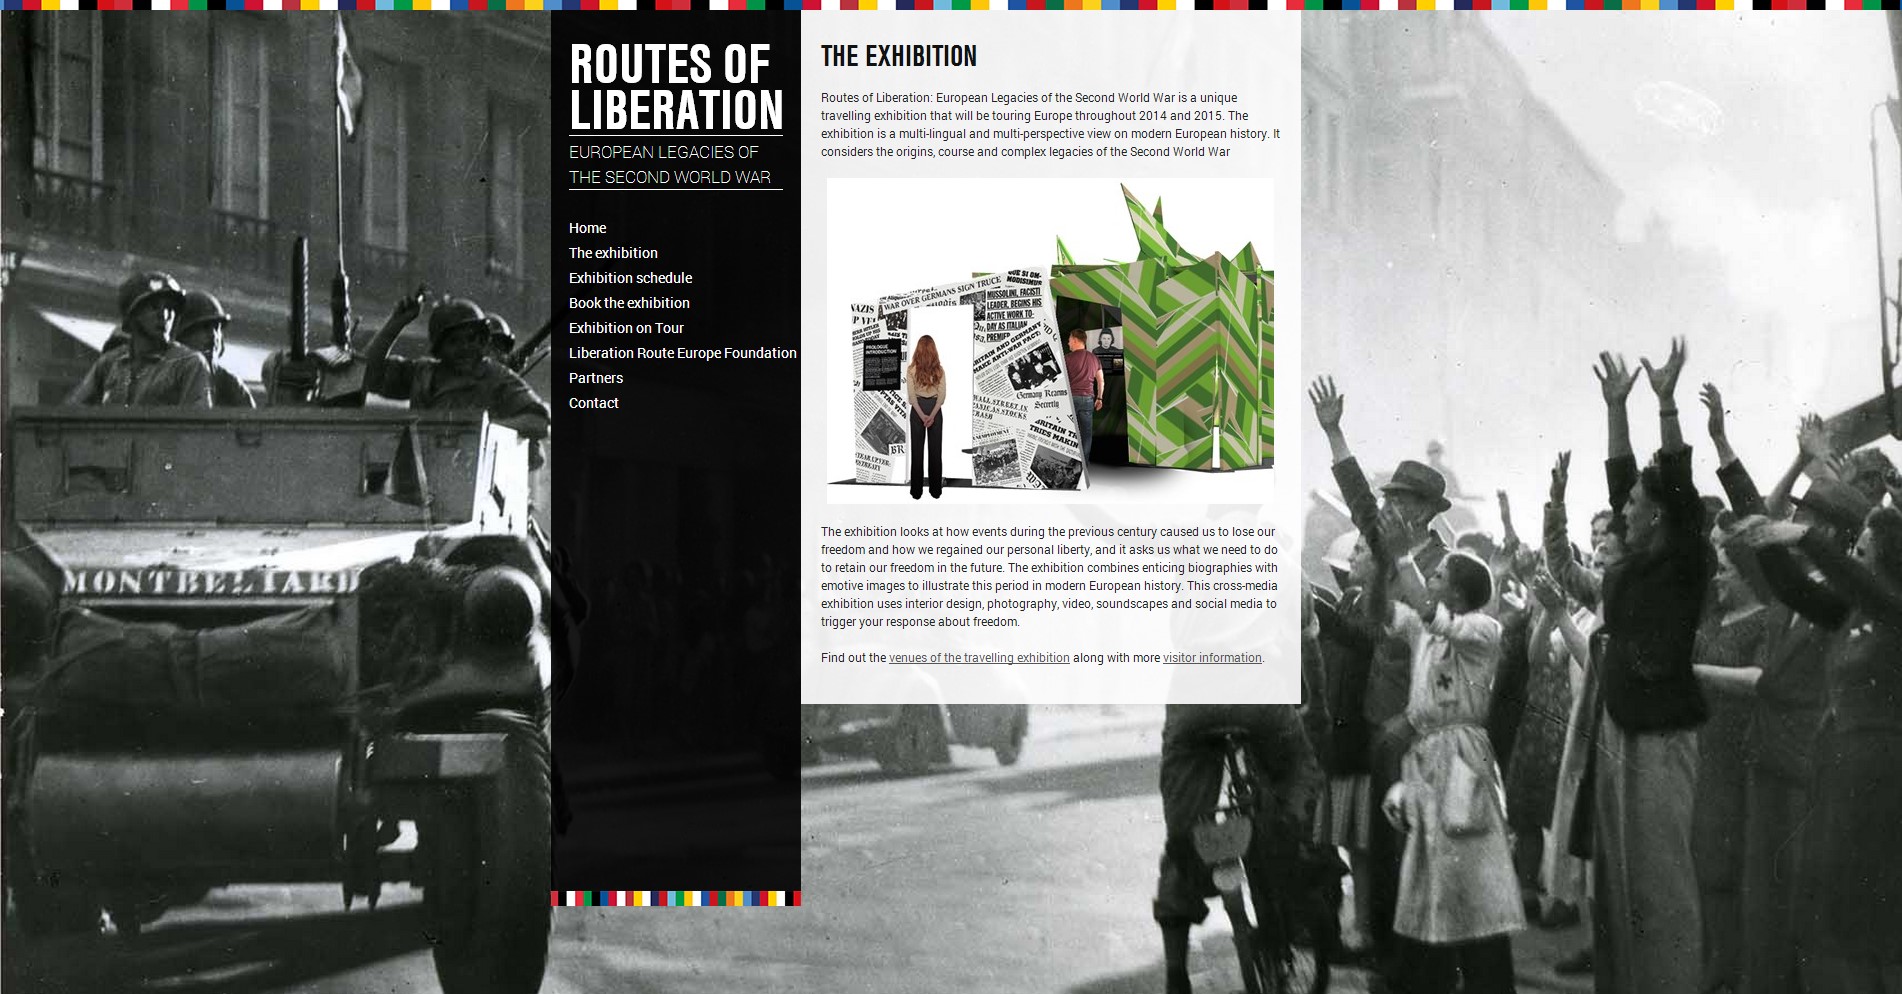 Routes of Liberation: European Legacies of the Second World War